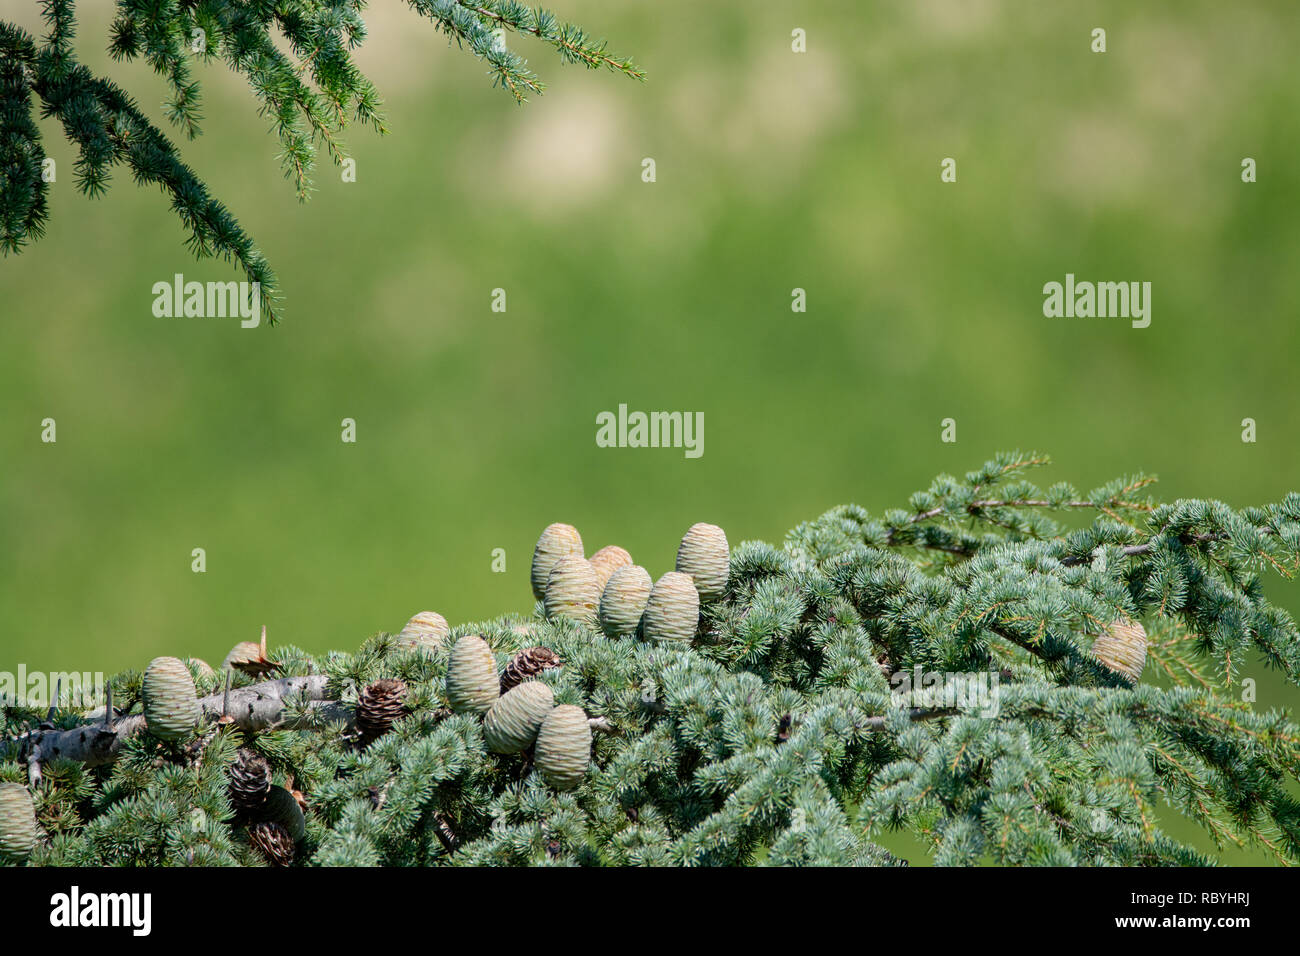 Himalayan cedar or deodar cedar tree with female and male cones, Christmas background close up copy space Stock Photo